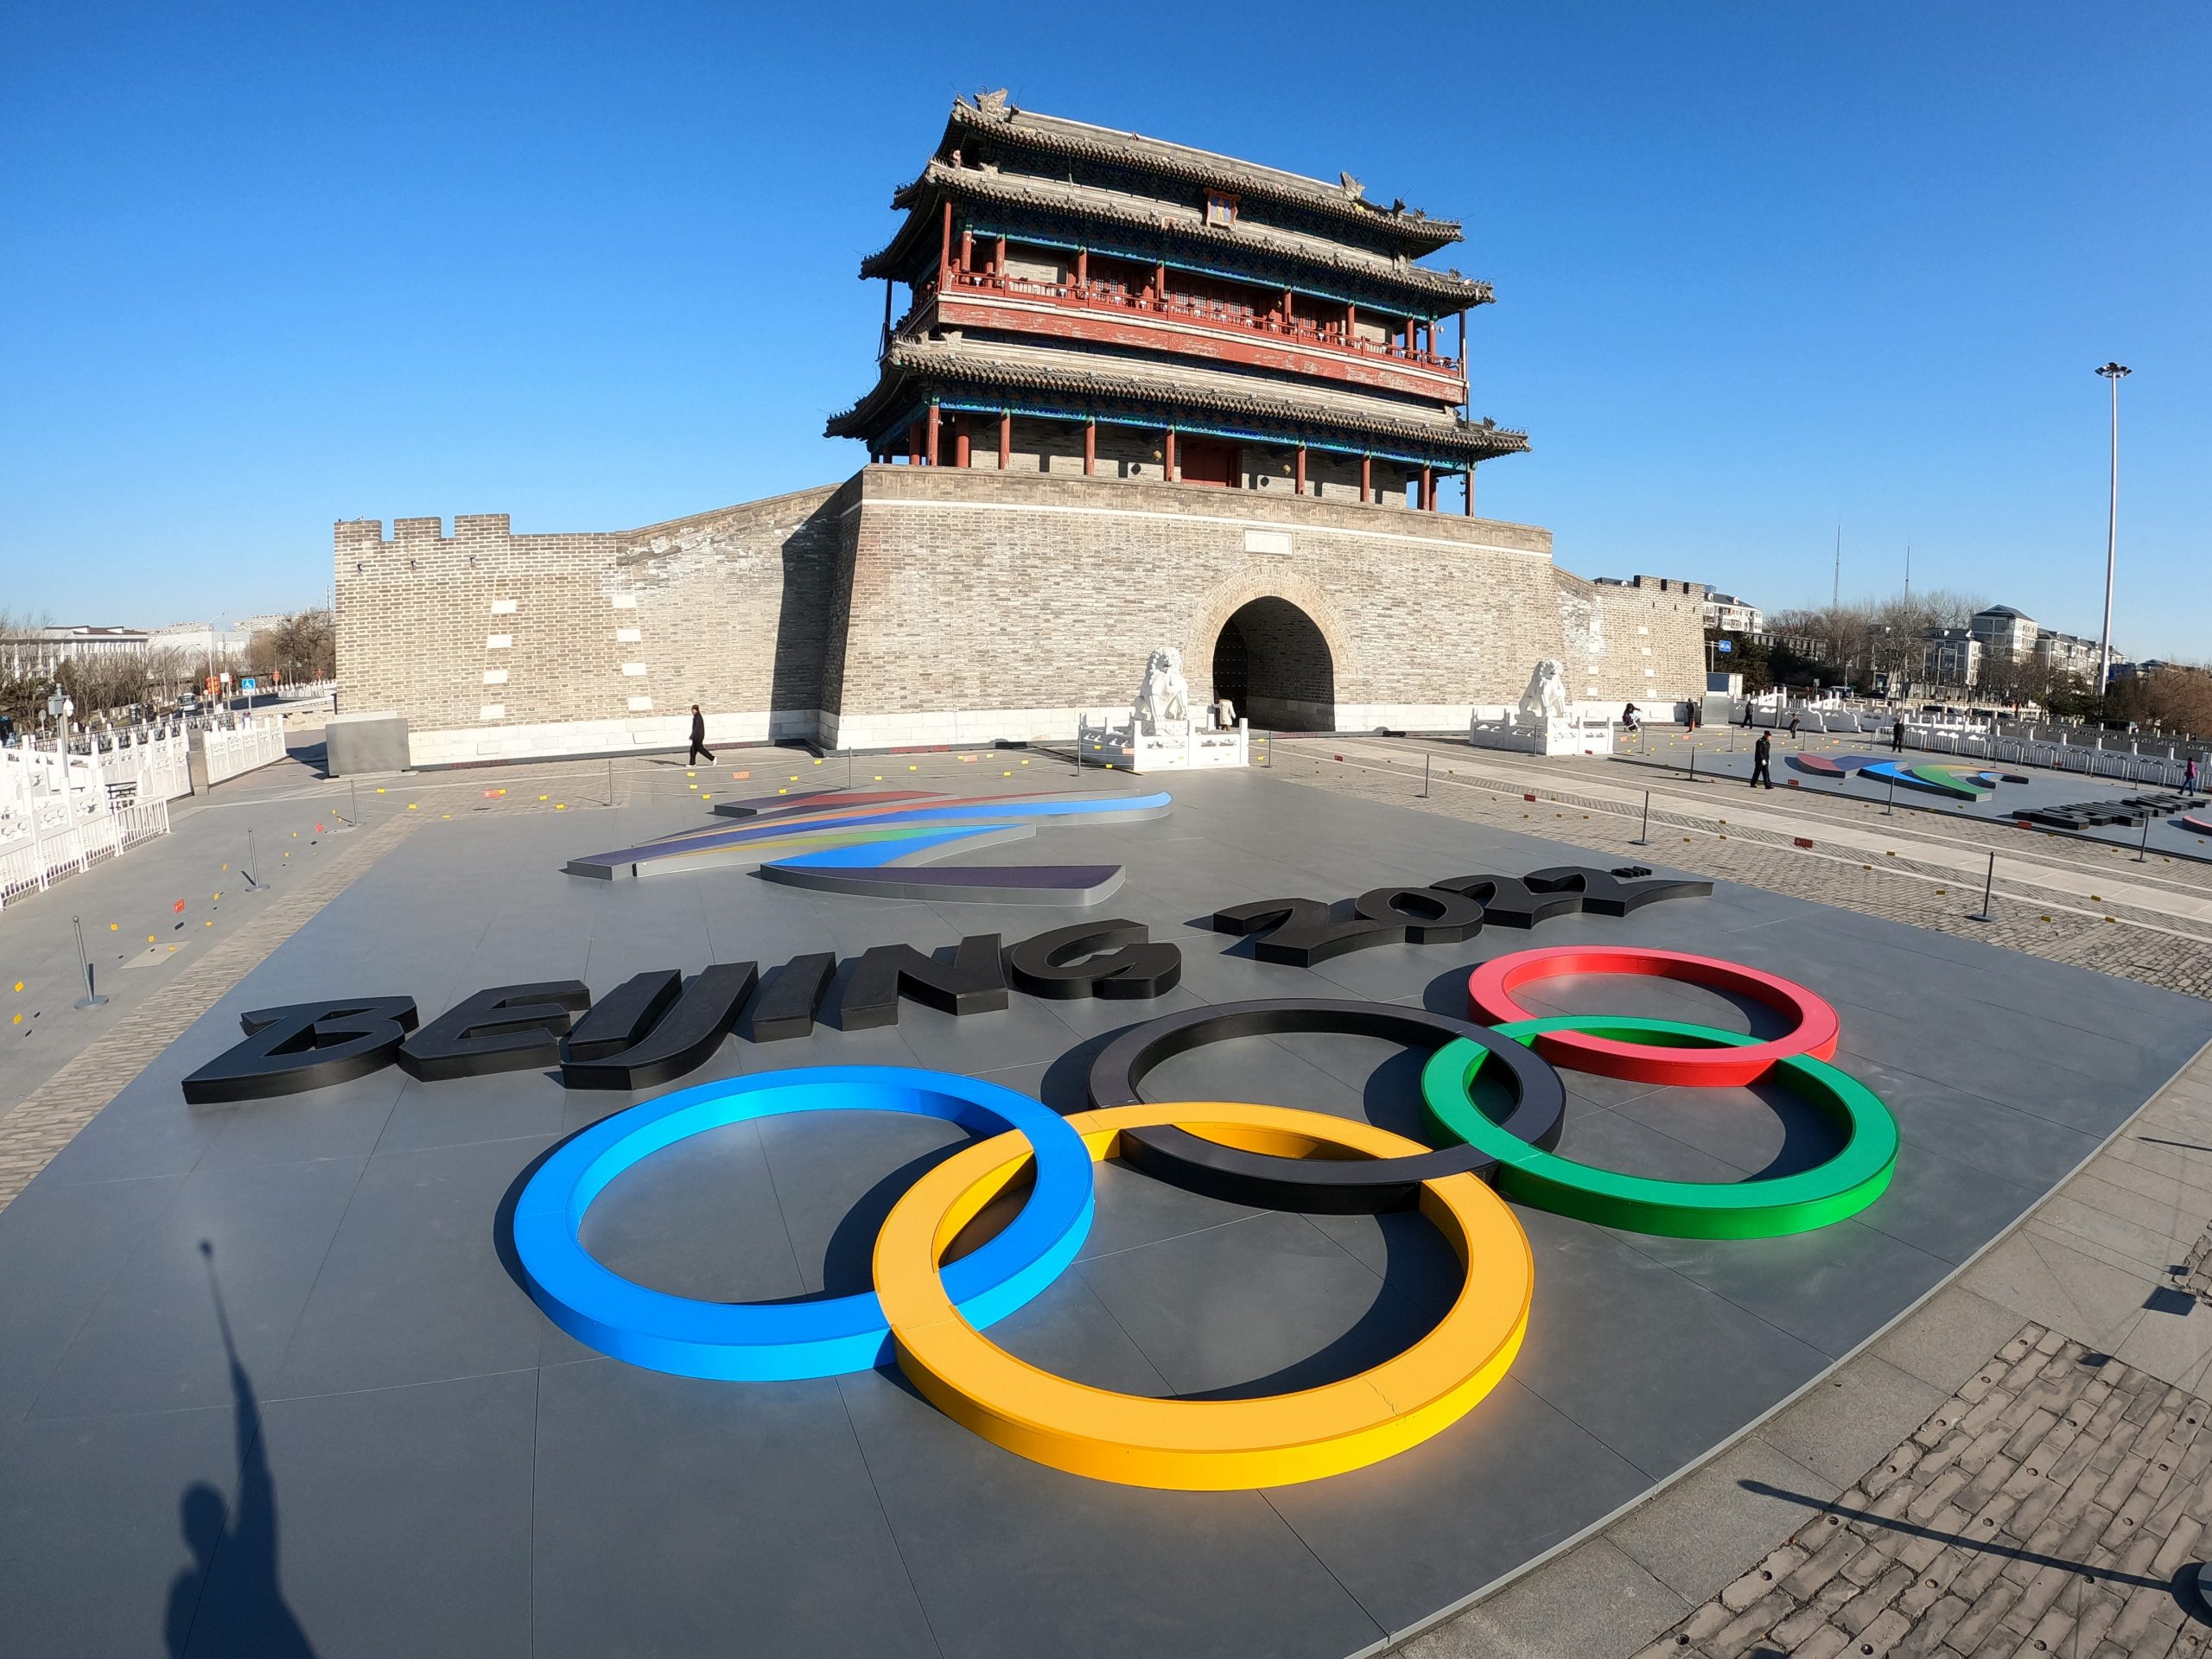 Image shows an installation of the emblem of Beijing 2022 Winter Olympic Games with the Olympic rings on Yongdingmen square on January 16, 2022 in Beijing, China